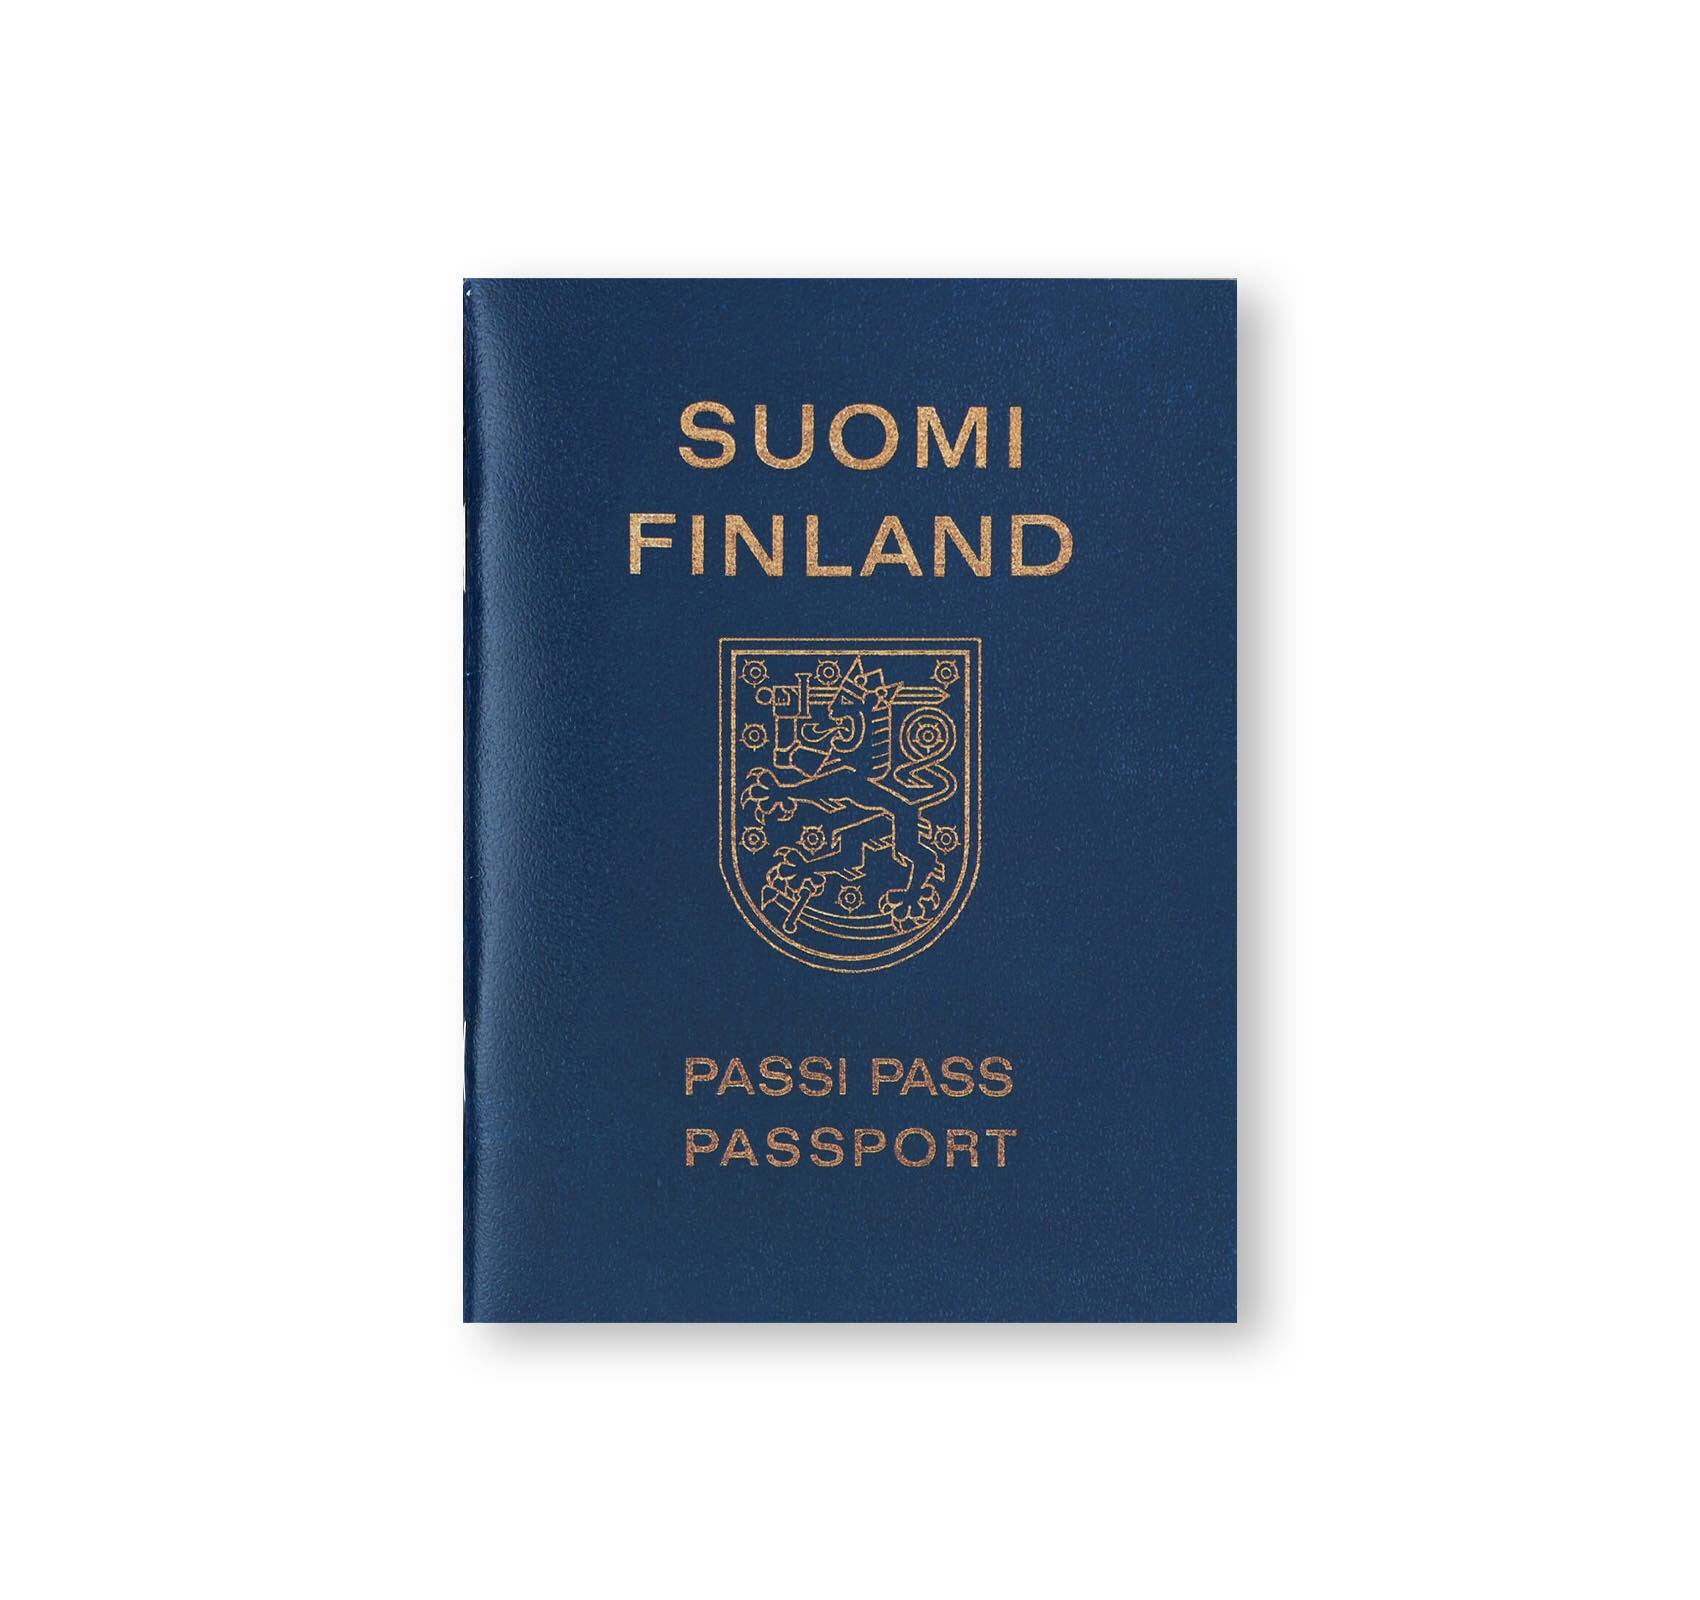 SUOMI FINLAND PASSI PASS PASSPORT by Lawrence Weiner